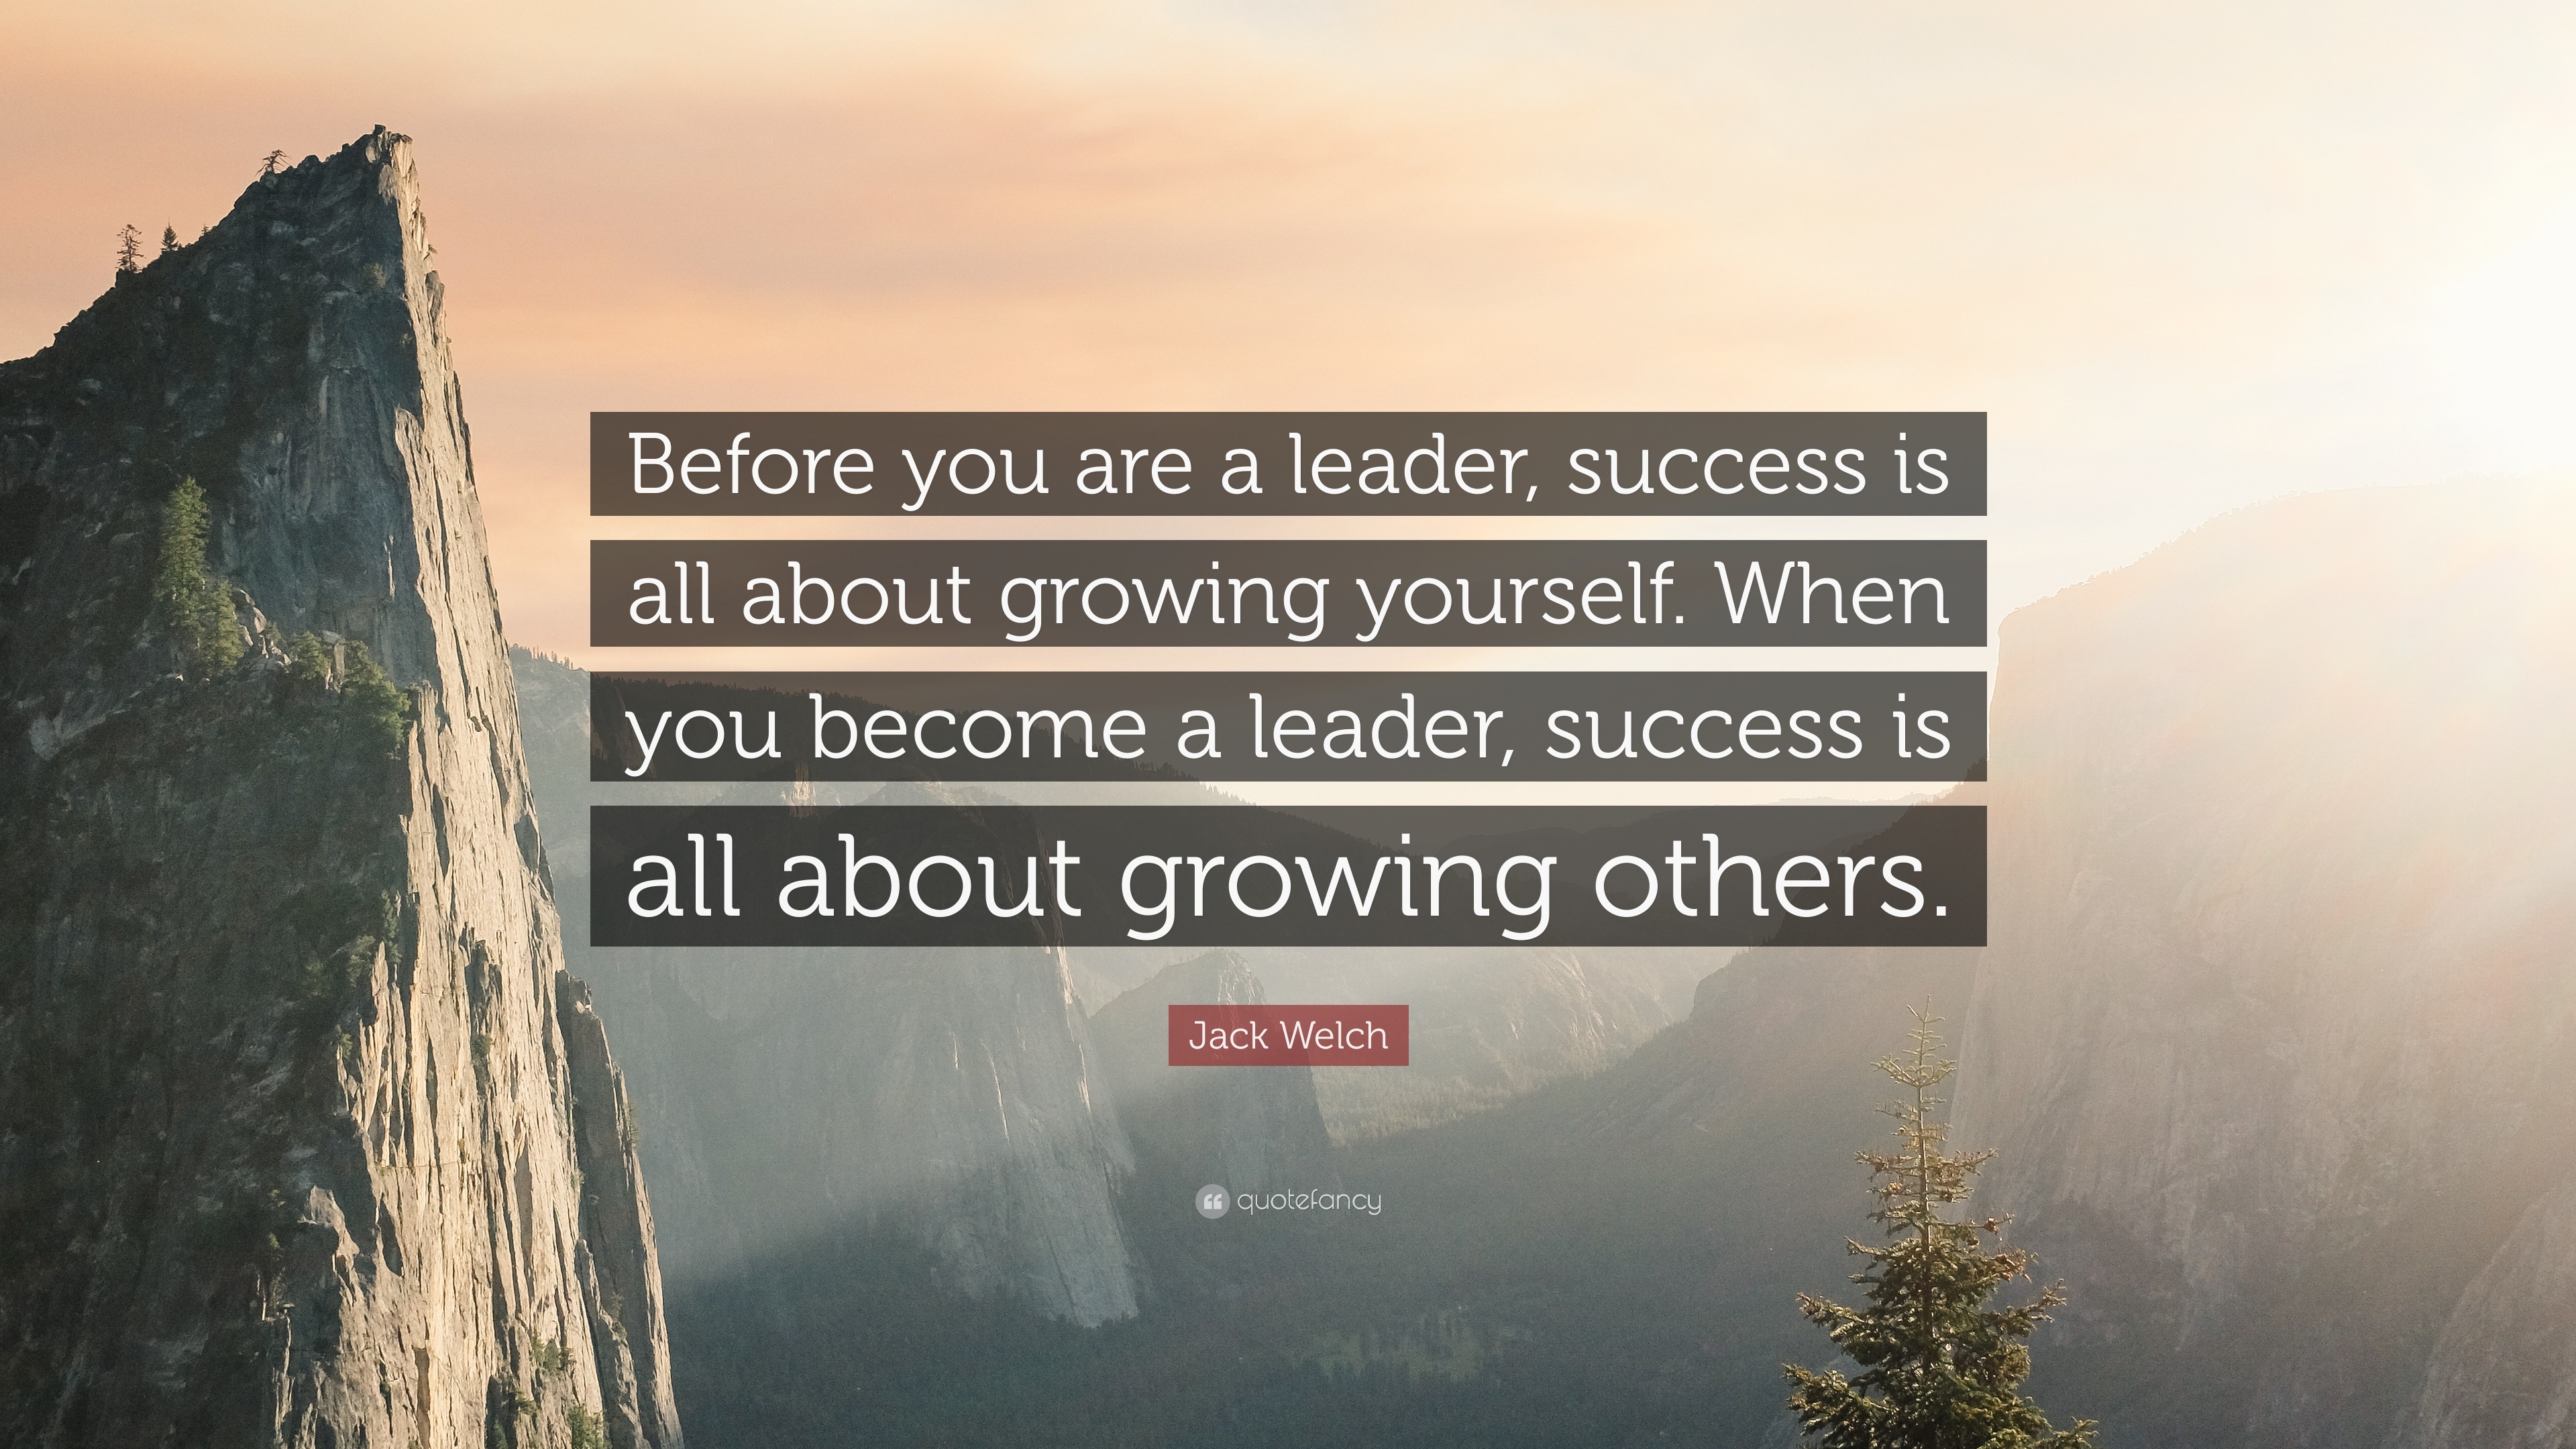 When you become a leader, success is all about growing others. 